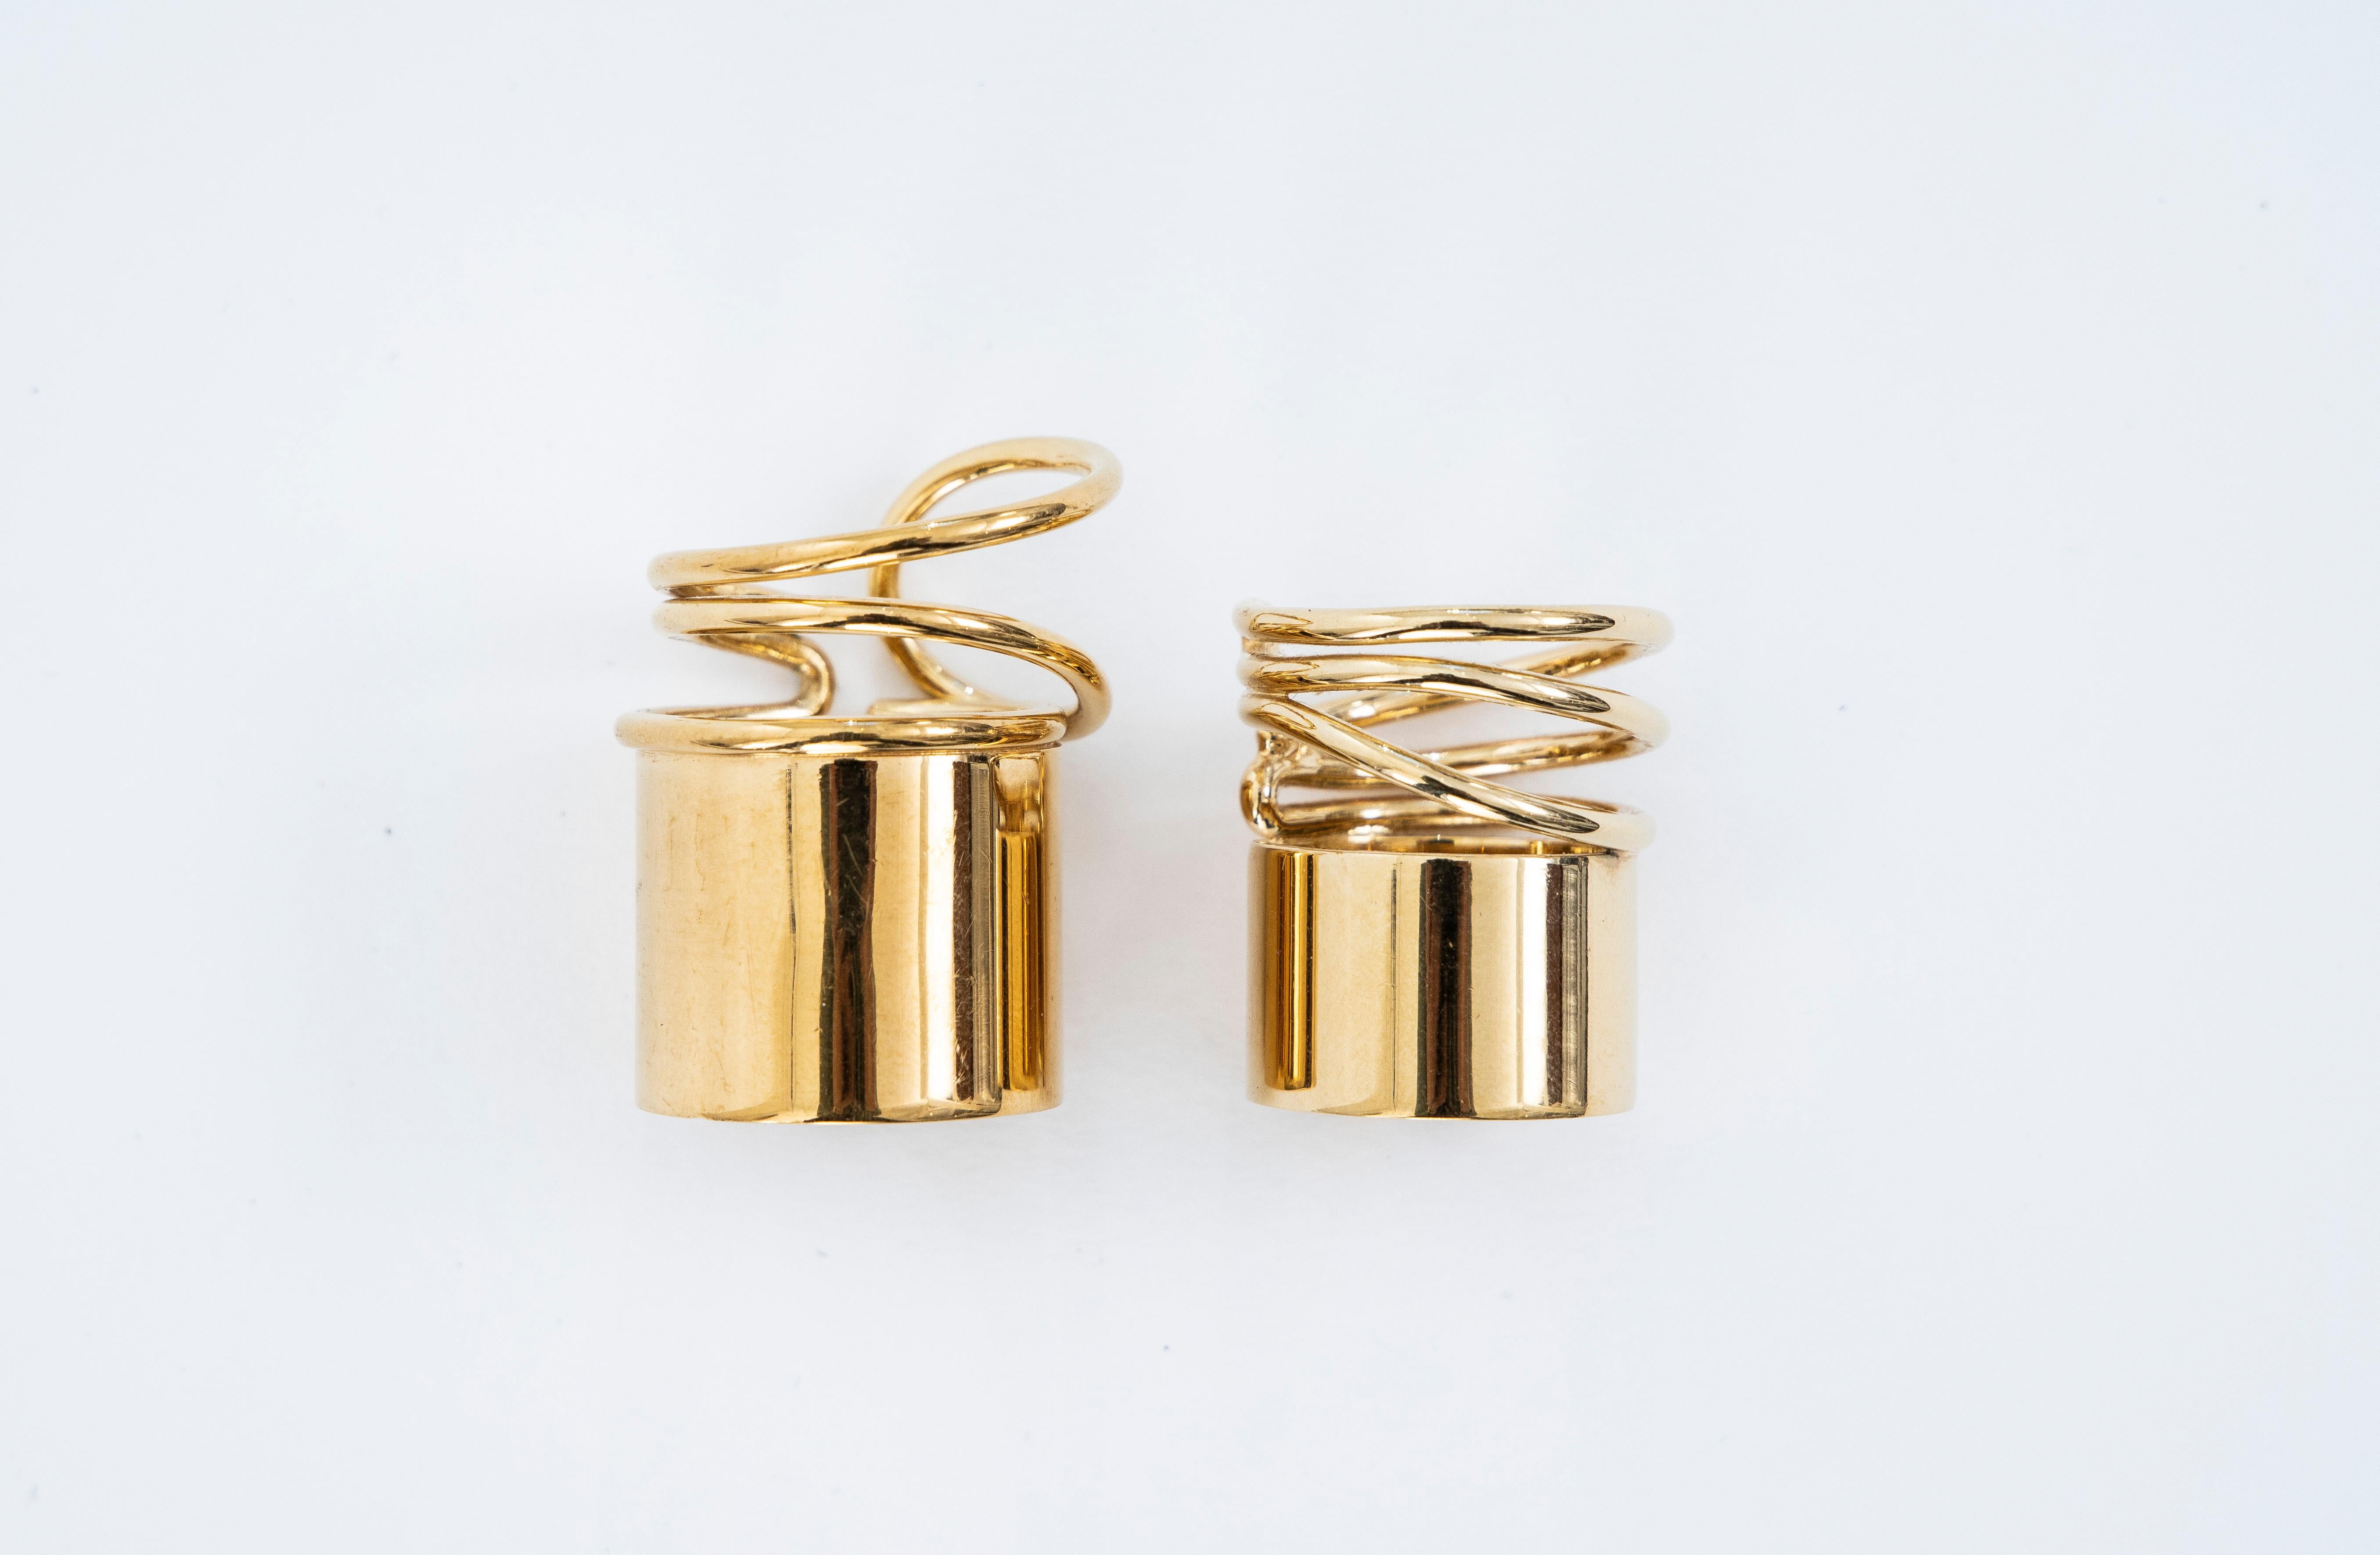 Nicolas Ghesquière for Balenciaga, Runway Spring-Summer 2013 a pair of gold tone brass coil rings designed by Charlotte Chesnais. 

Size: 6.5
Size: 8